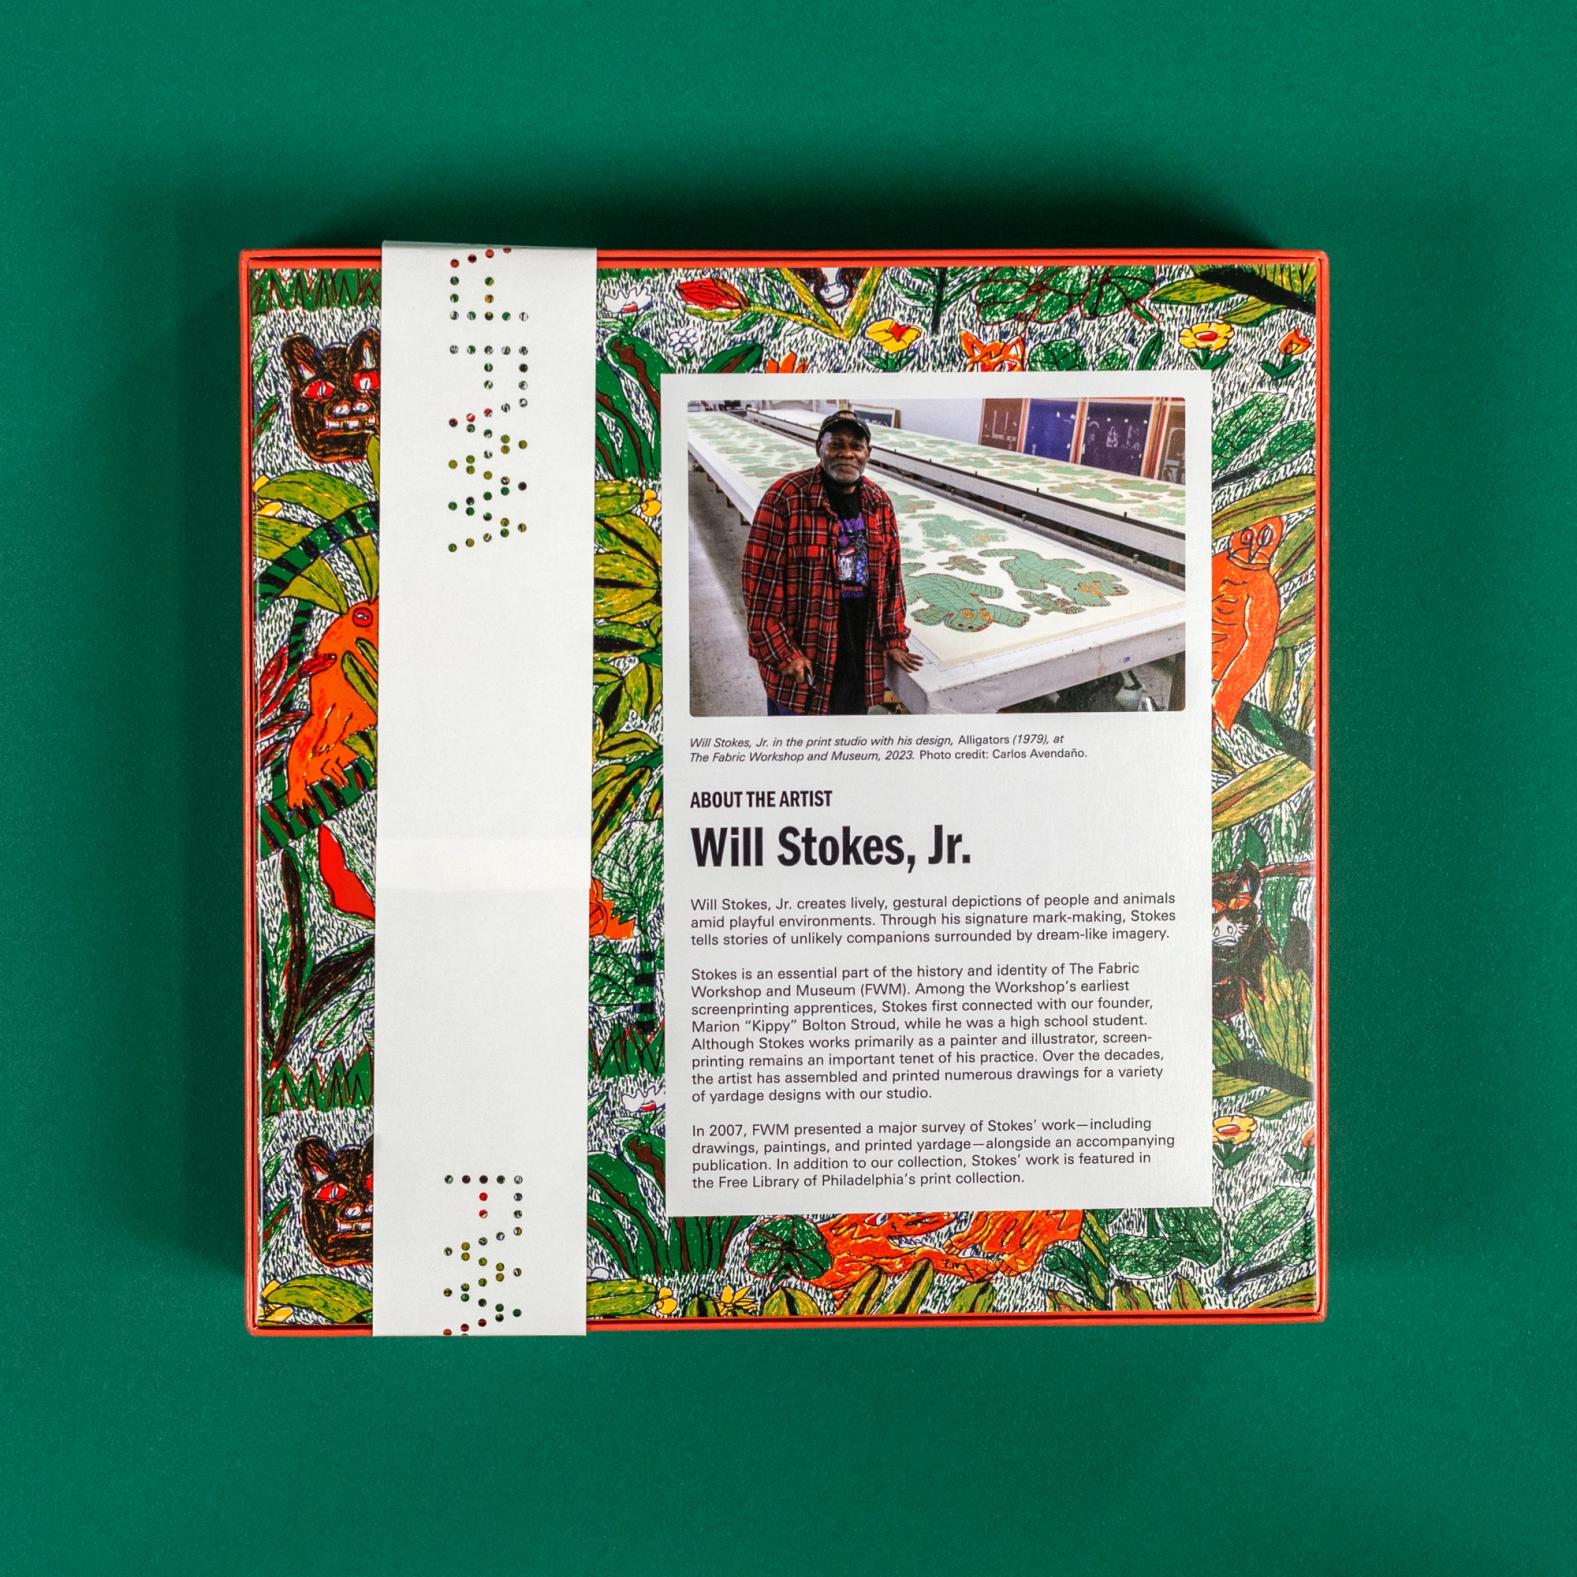 The puzzle is sitting against a dark green background face down and showing the back of the box. The back of the box has the same pattern as the front, but a white box includes a photo of the artist, Will Stokes, Jr., and a brief description of his work.